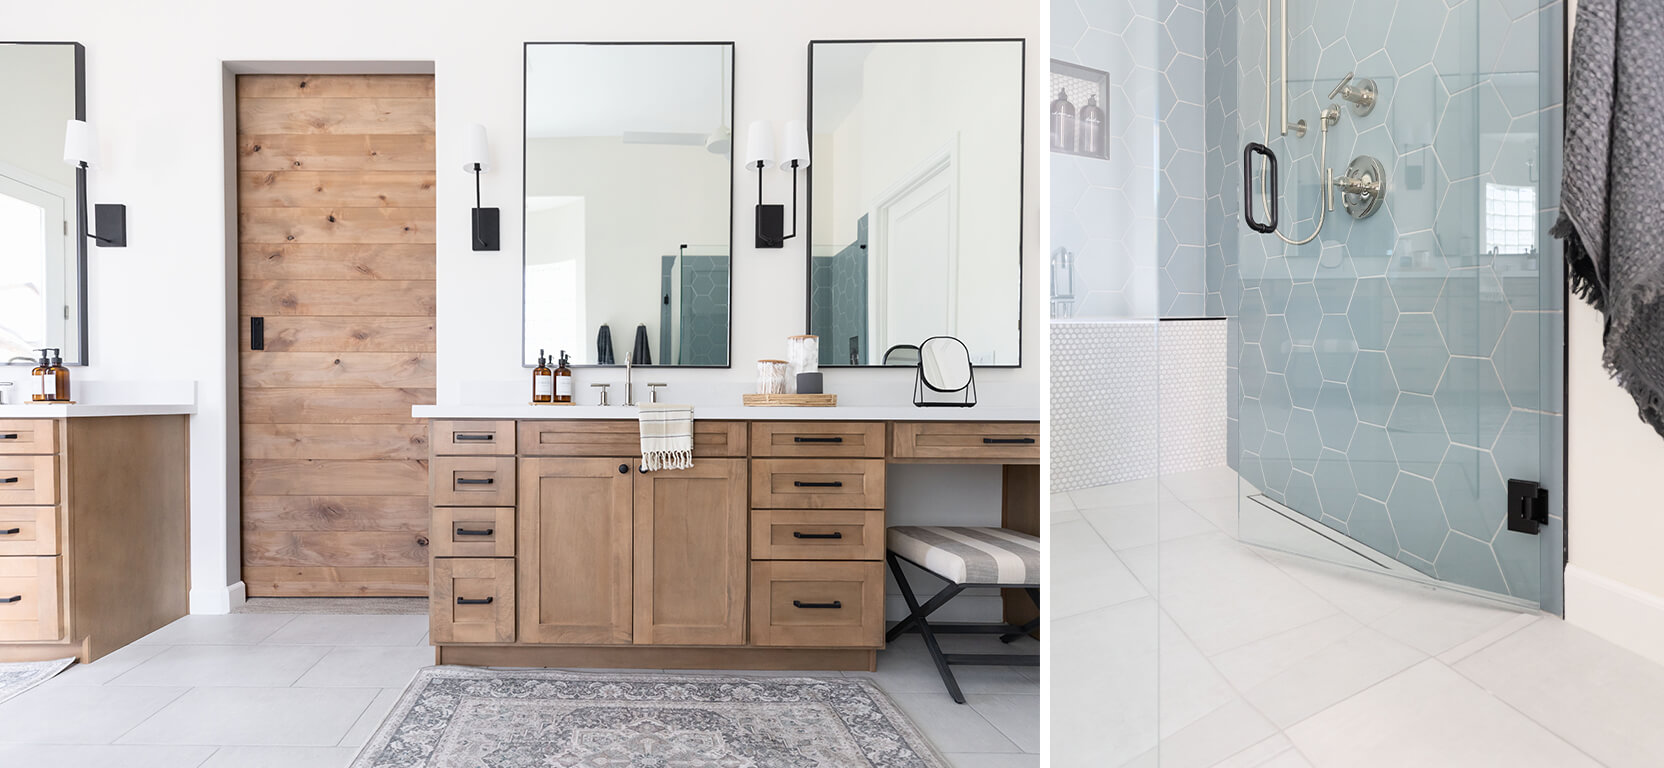 Left image: Double bathroom vanity with natural wood cabinetry, large rectangular mirrors and modern fixtures.  Right image: Closeup of curbless shower entry with tiled bench and hexagonal light-blue tiled walls.